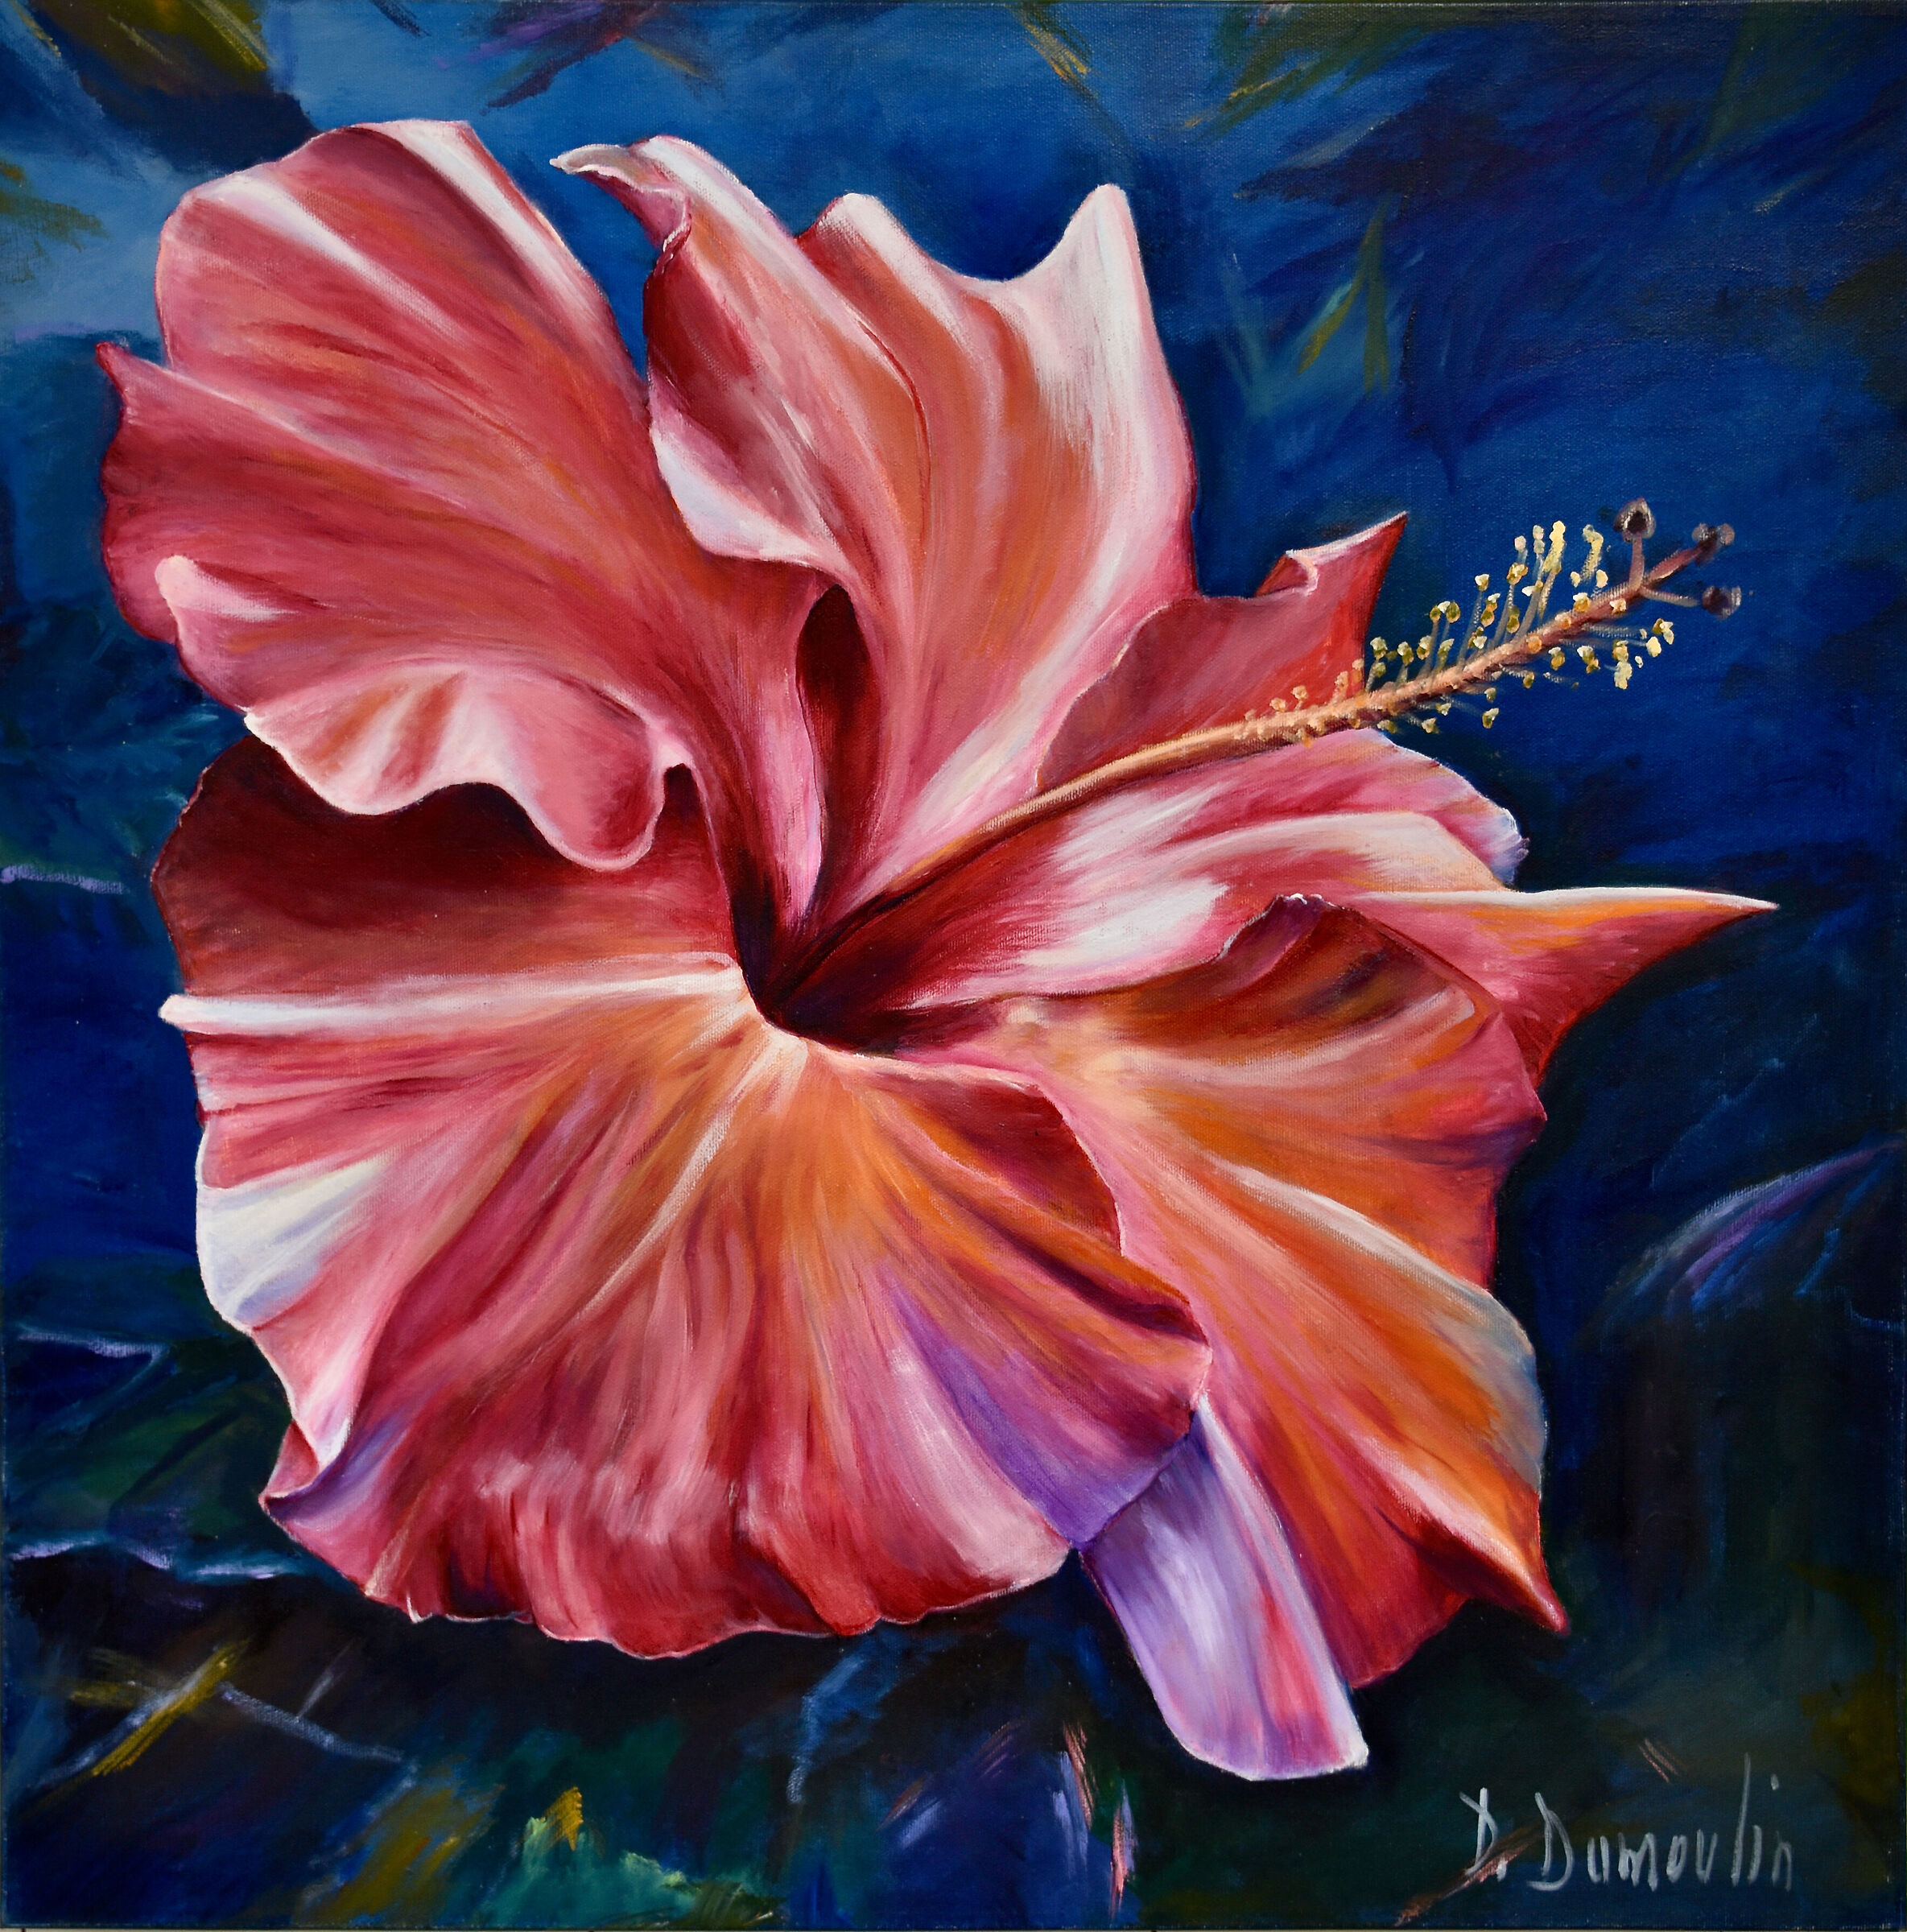 Known painter in Quebec D. Dumoulin - Exhibitor...